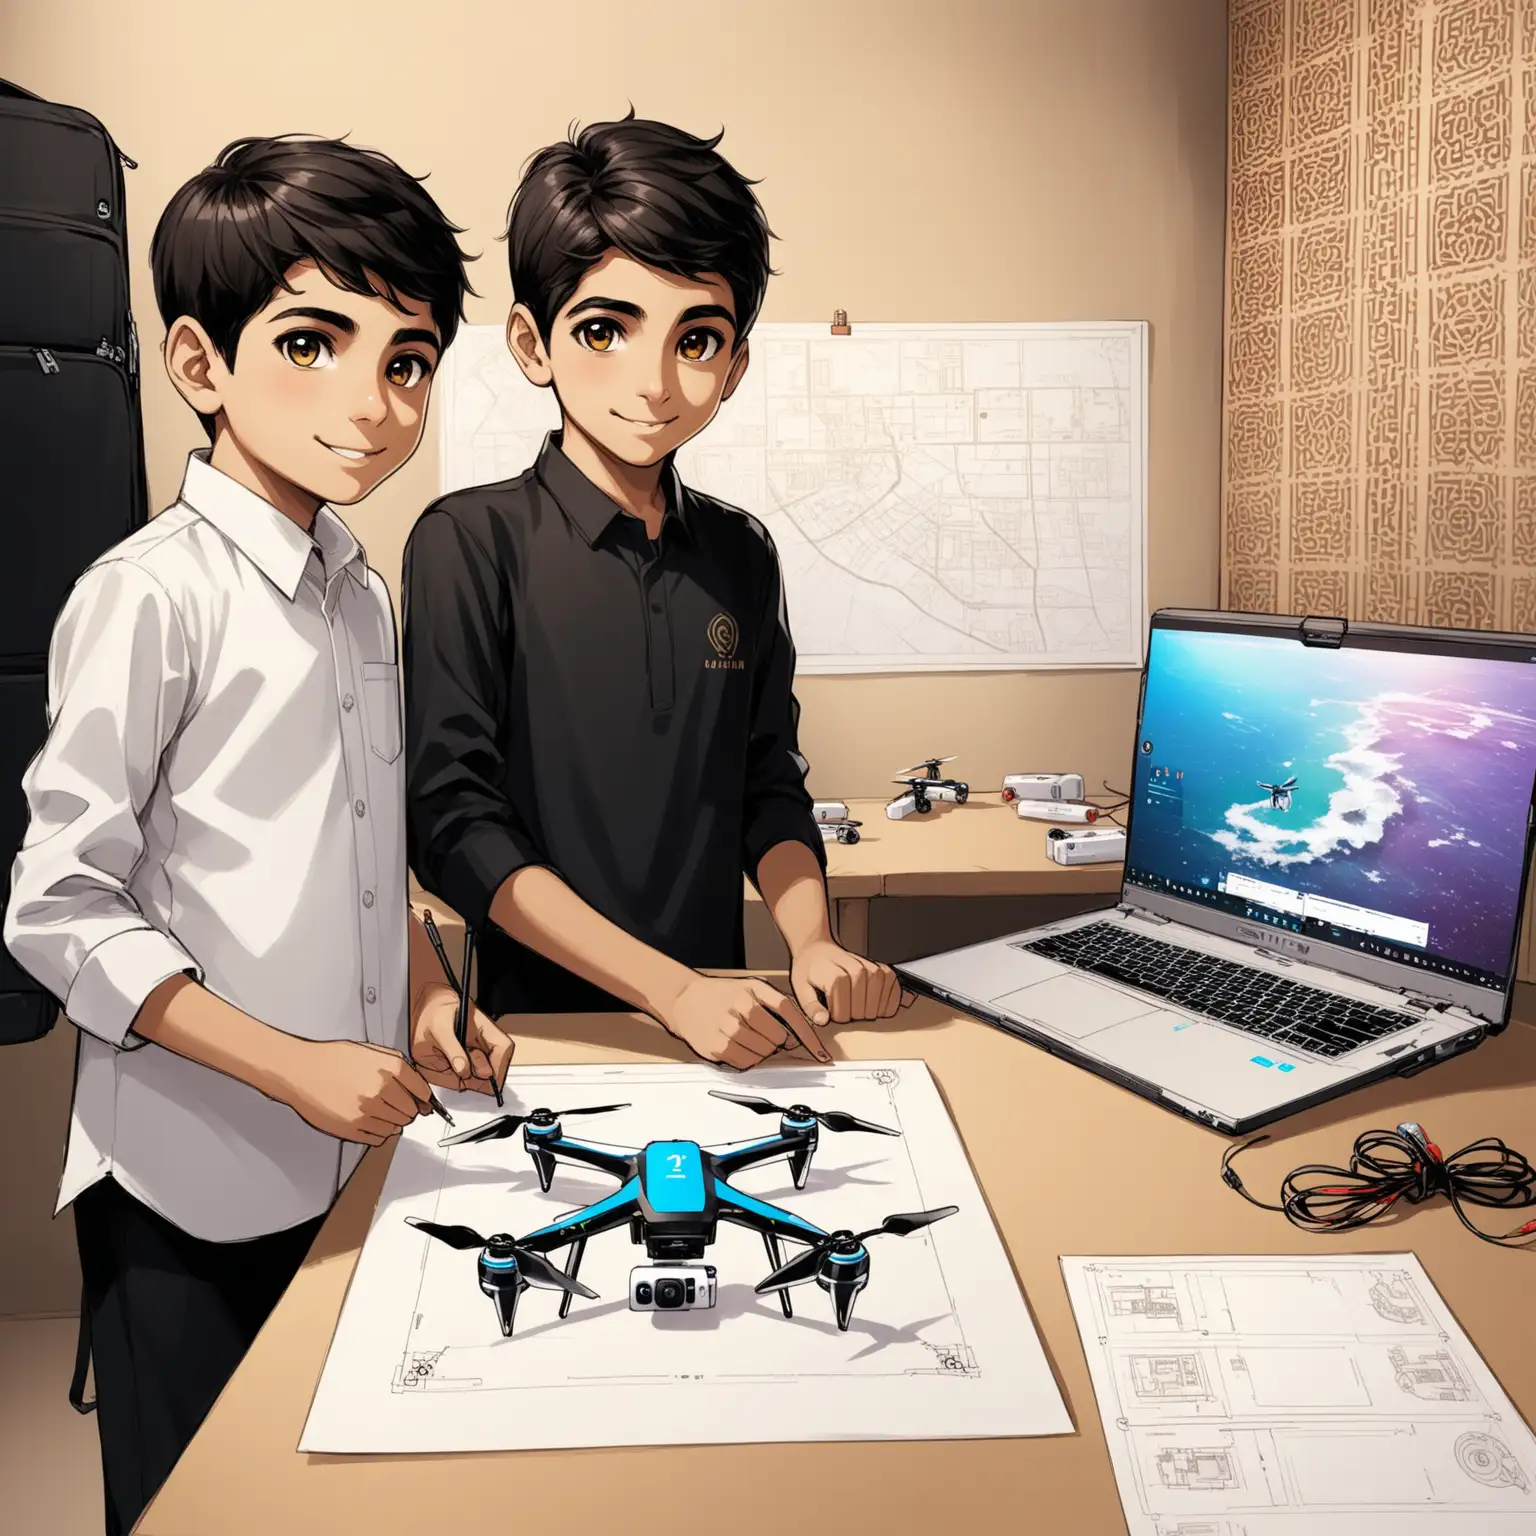 Persian Boys Designing Super Modern Drones in HighTech Shed